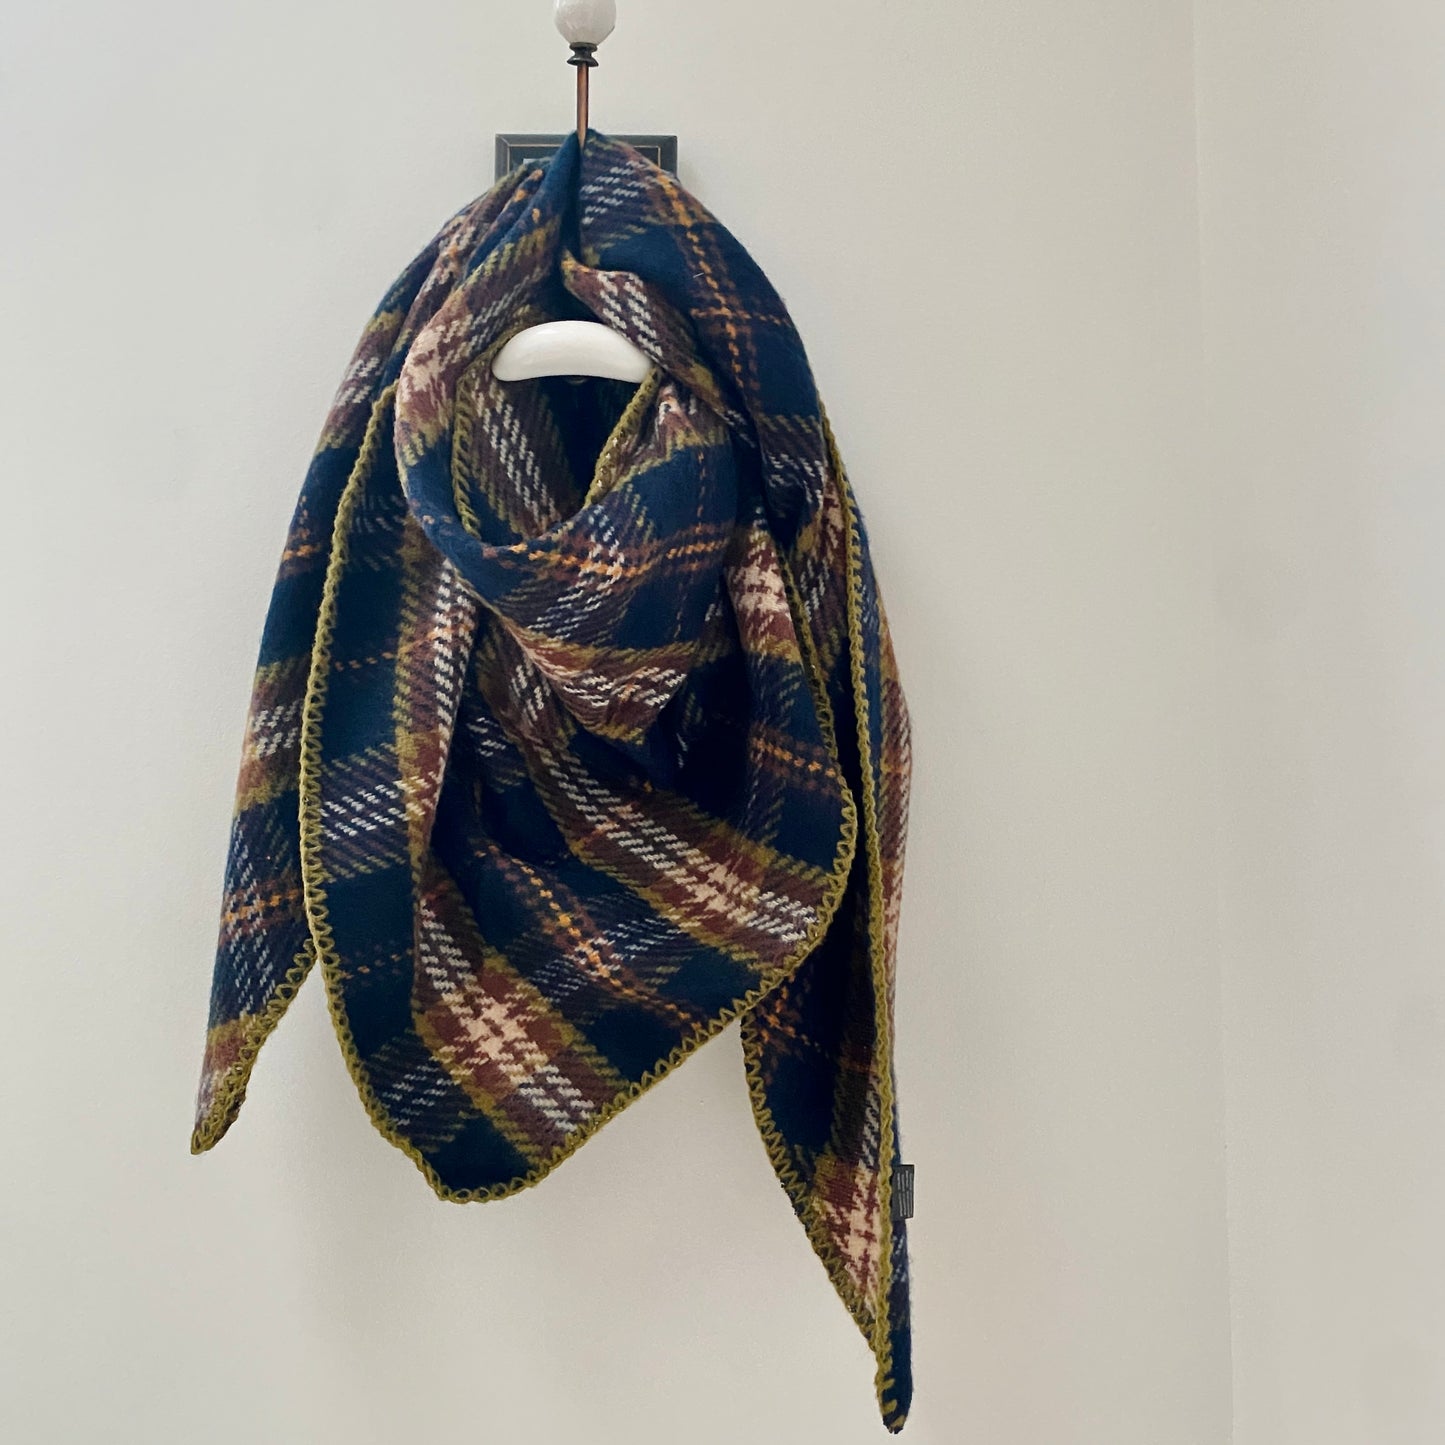      Navy tartan pattern thick scarf     Triangular shaped      Blanket stitched edge detail in khaki     Super soft feel     80% Acrylic 20% Wool     Measures 37" (at longest width point) x 37" (at honest depth point)     Also available in Red